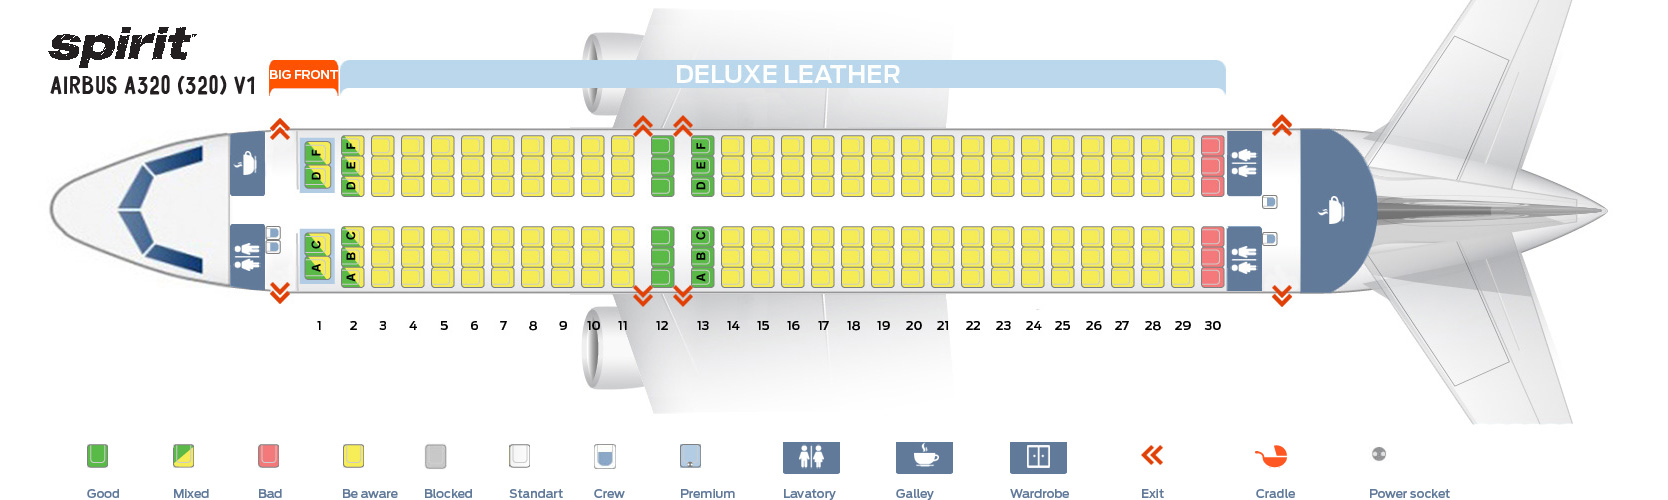 Seat Map Airbus A320 200 Spirit Airlines Best Seats In The